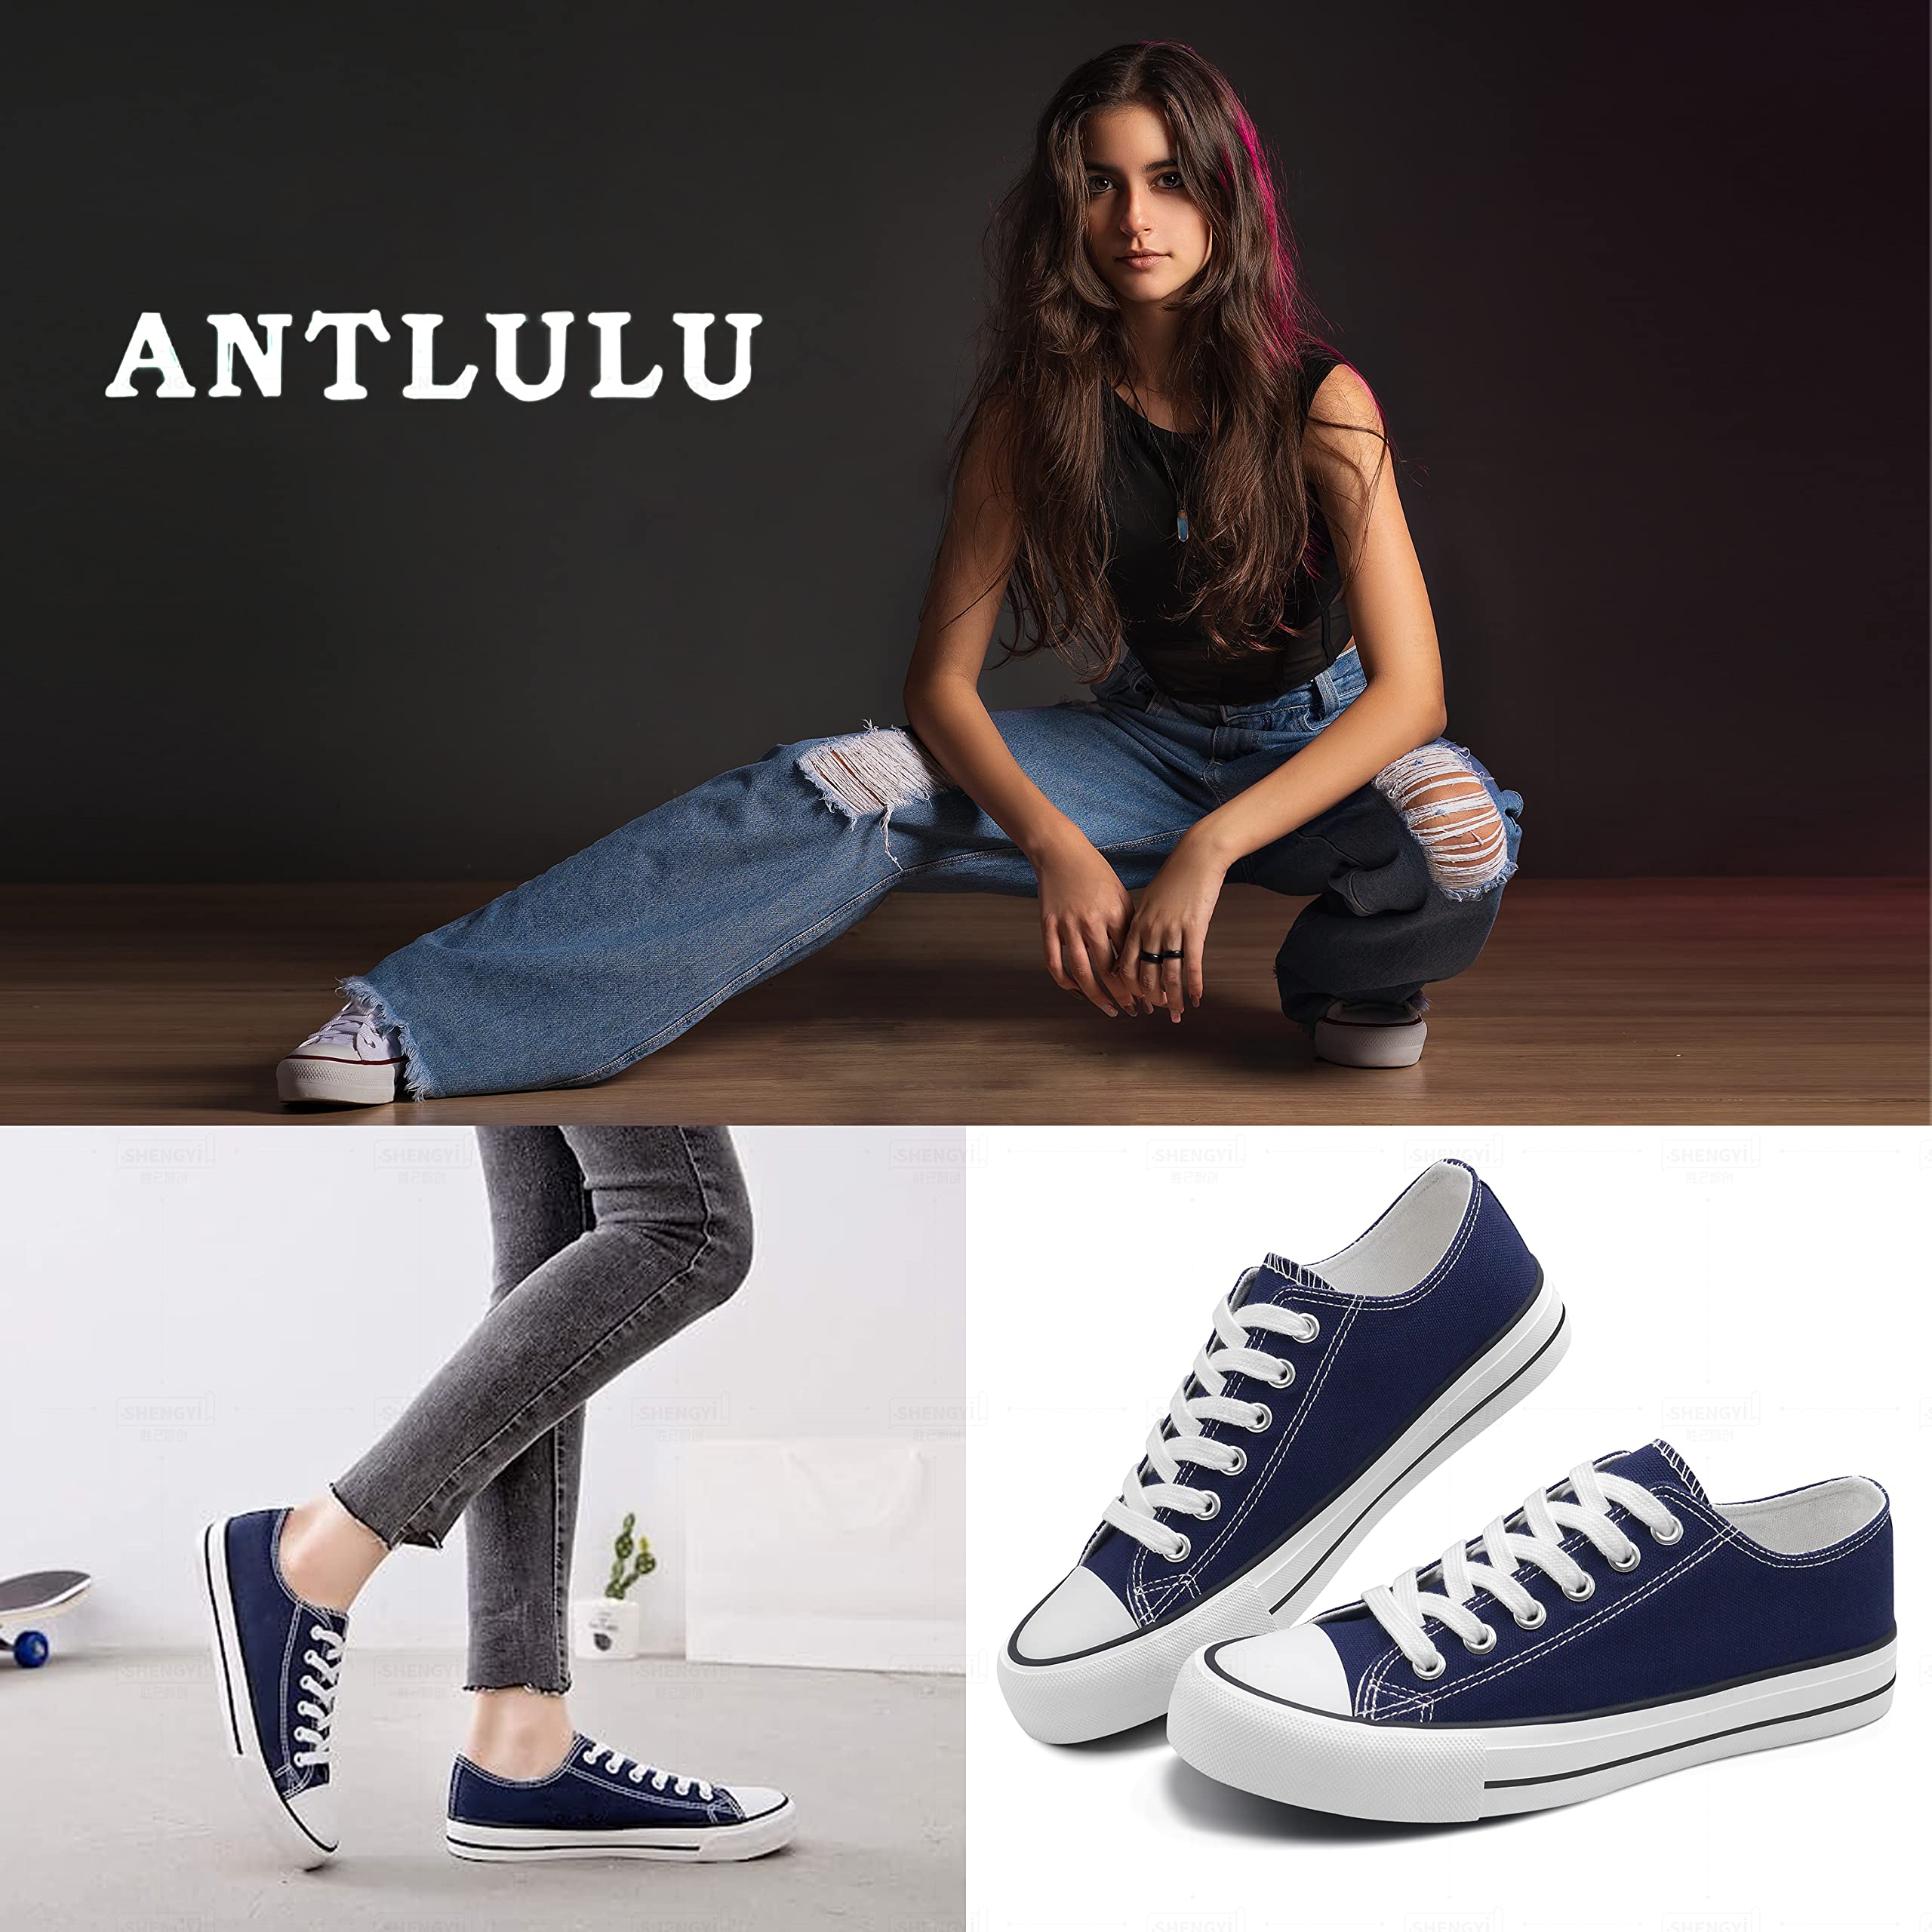 ANTLULU Womens Canvas Shoes Low Top and Lace up Fashion Casual Sneakers Black and White Classic